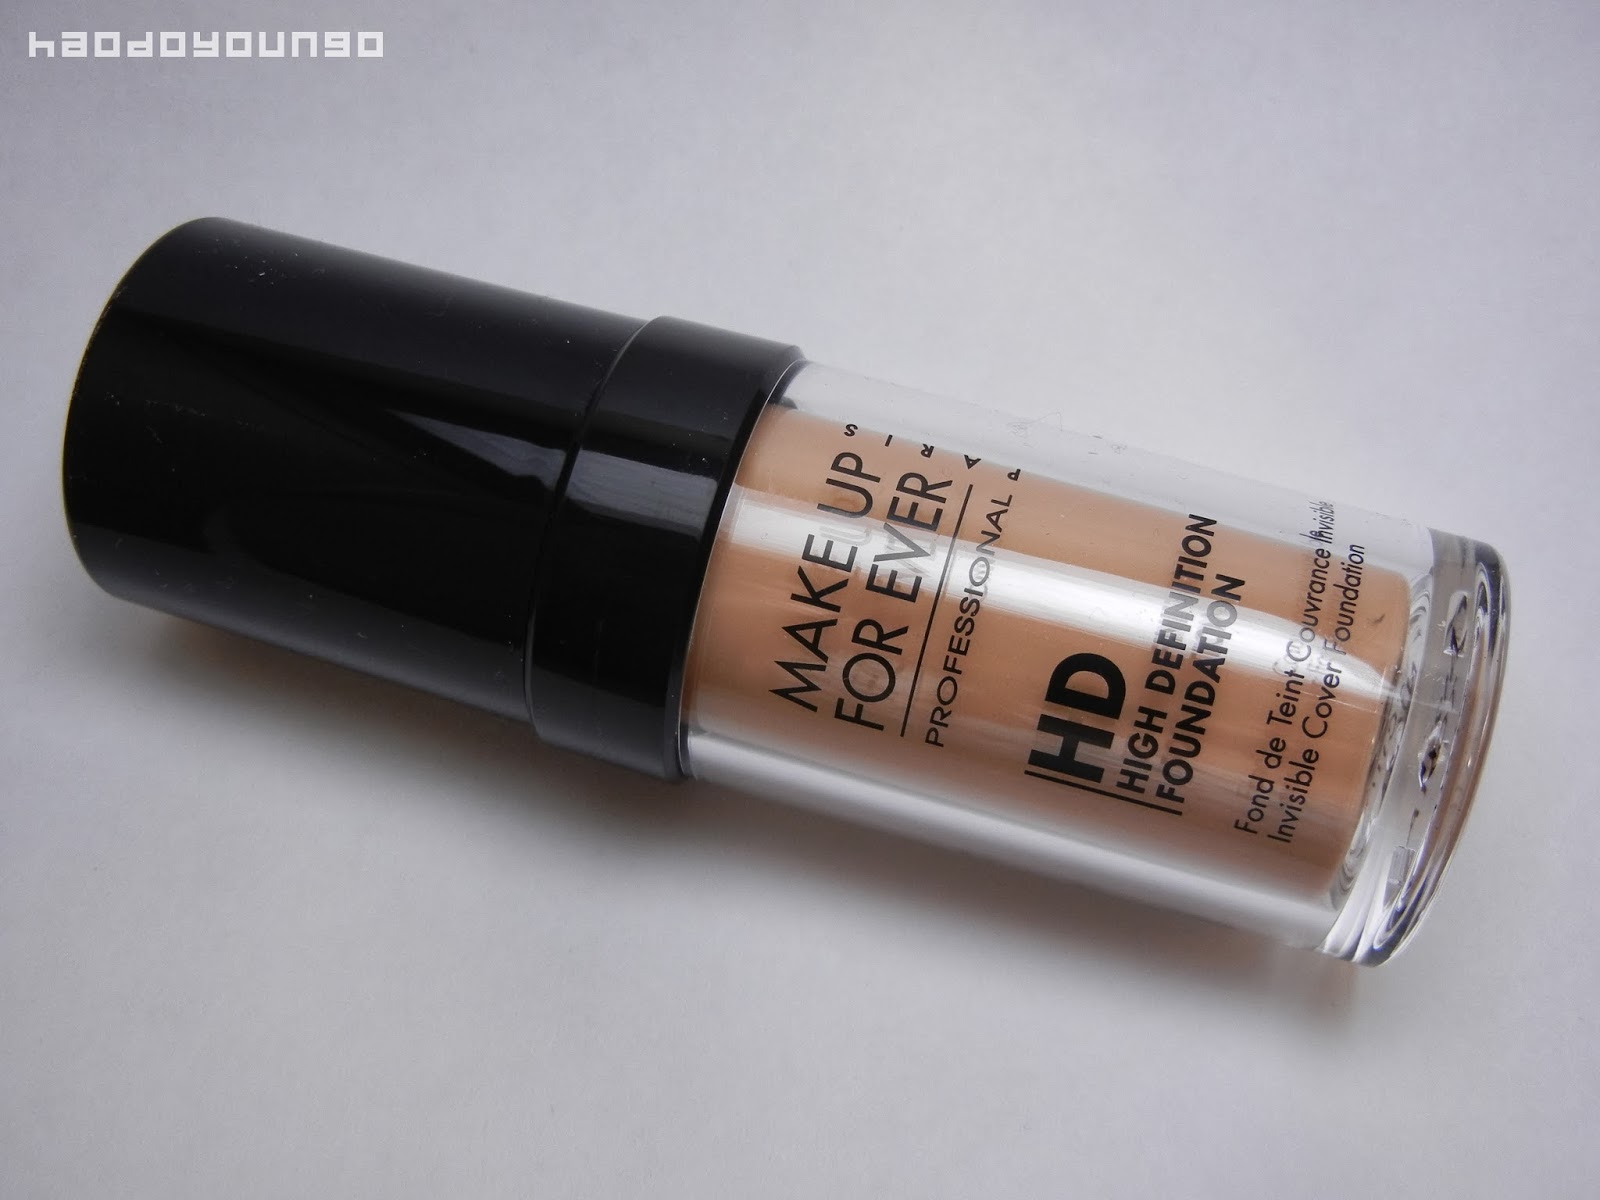 Review & Swatches: Makeup Forever HD Foundation in #127 Dark Sand